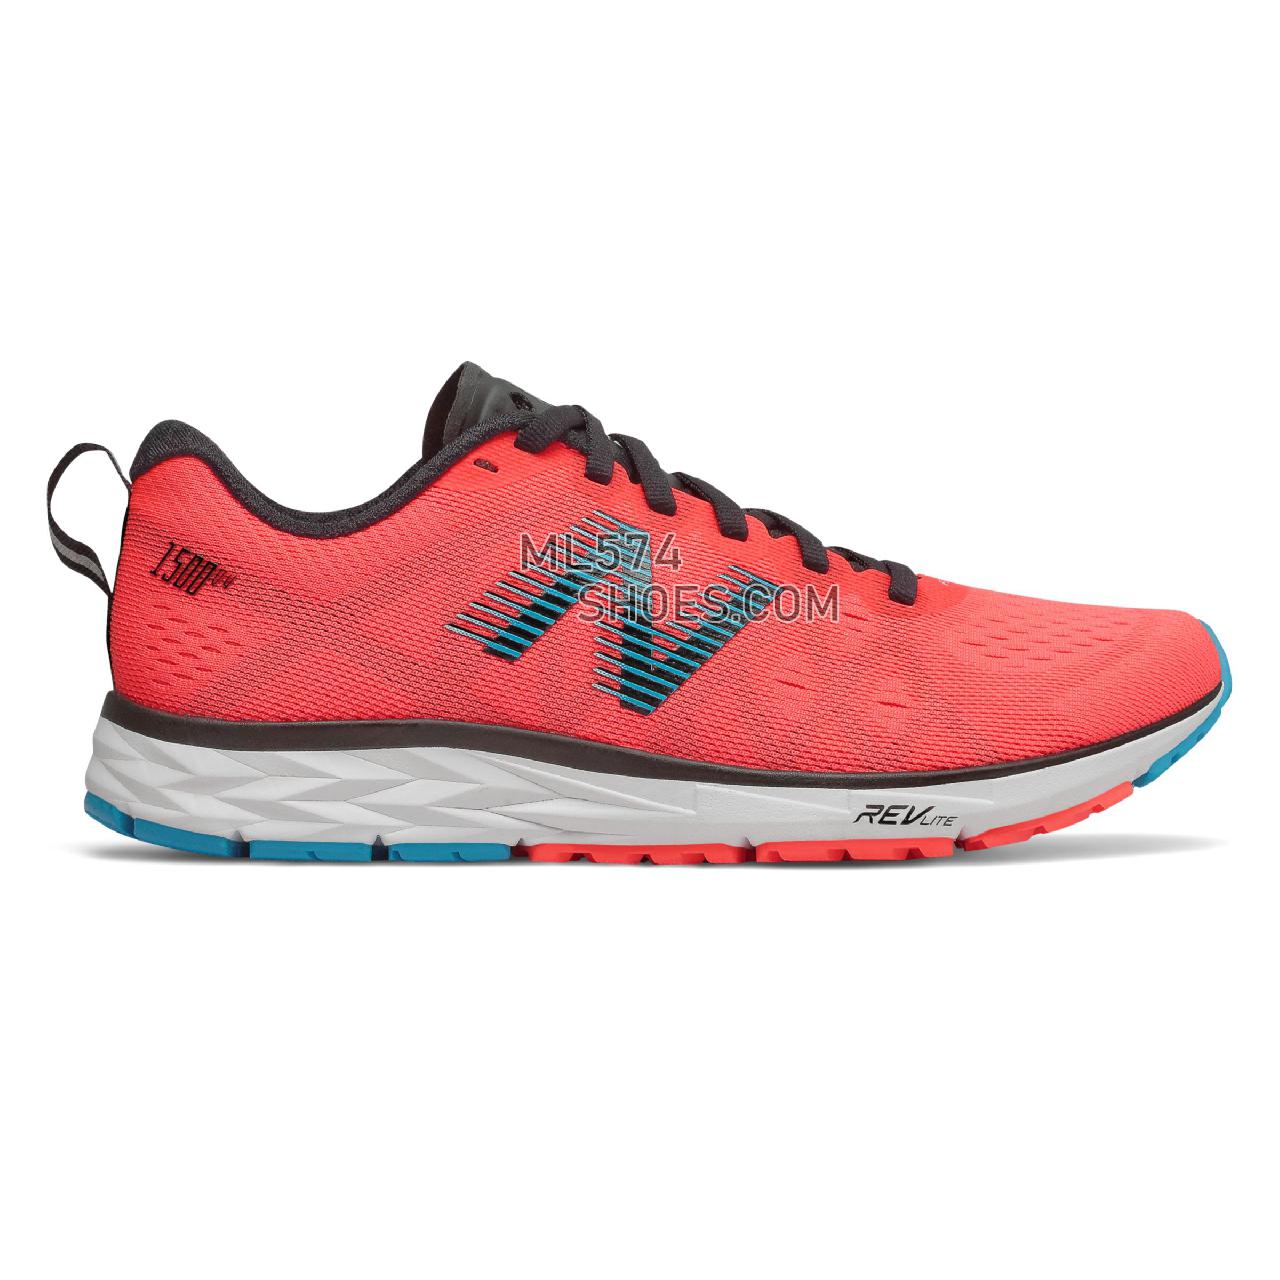 New Balance 1500v4 - Women's 1500 - Running Dragonfly with Black - W1500PP4